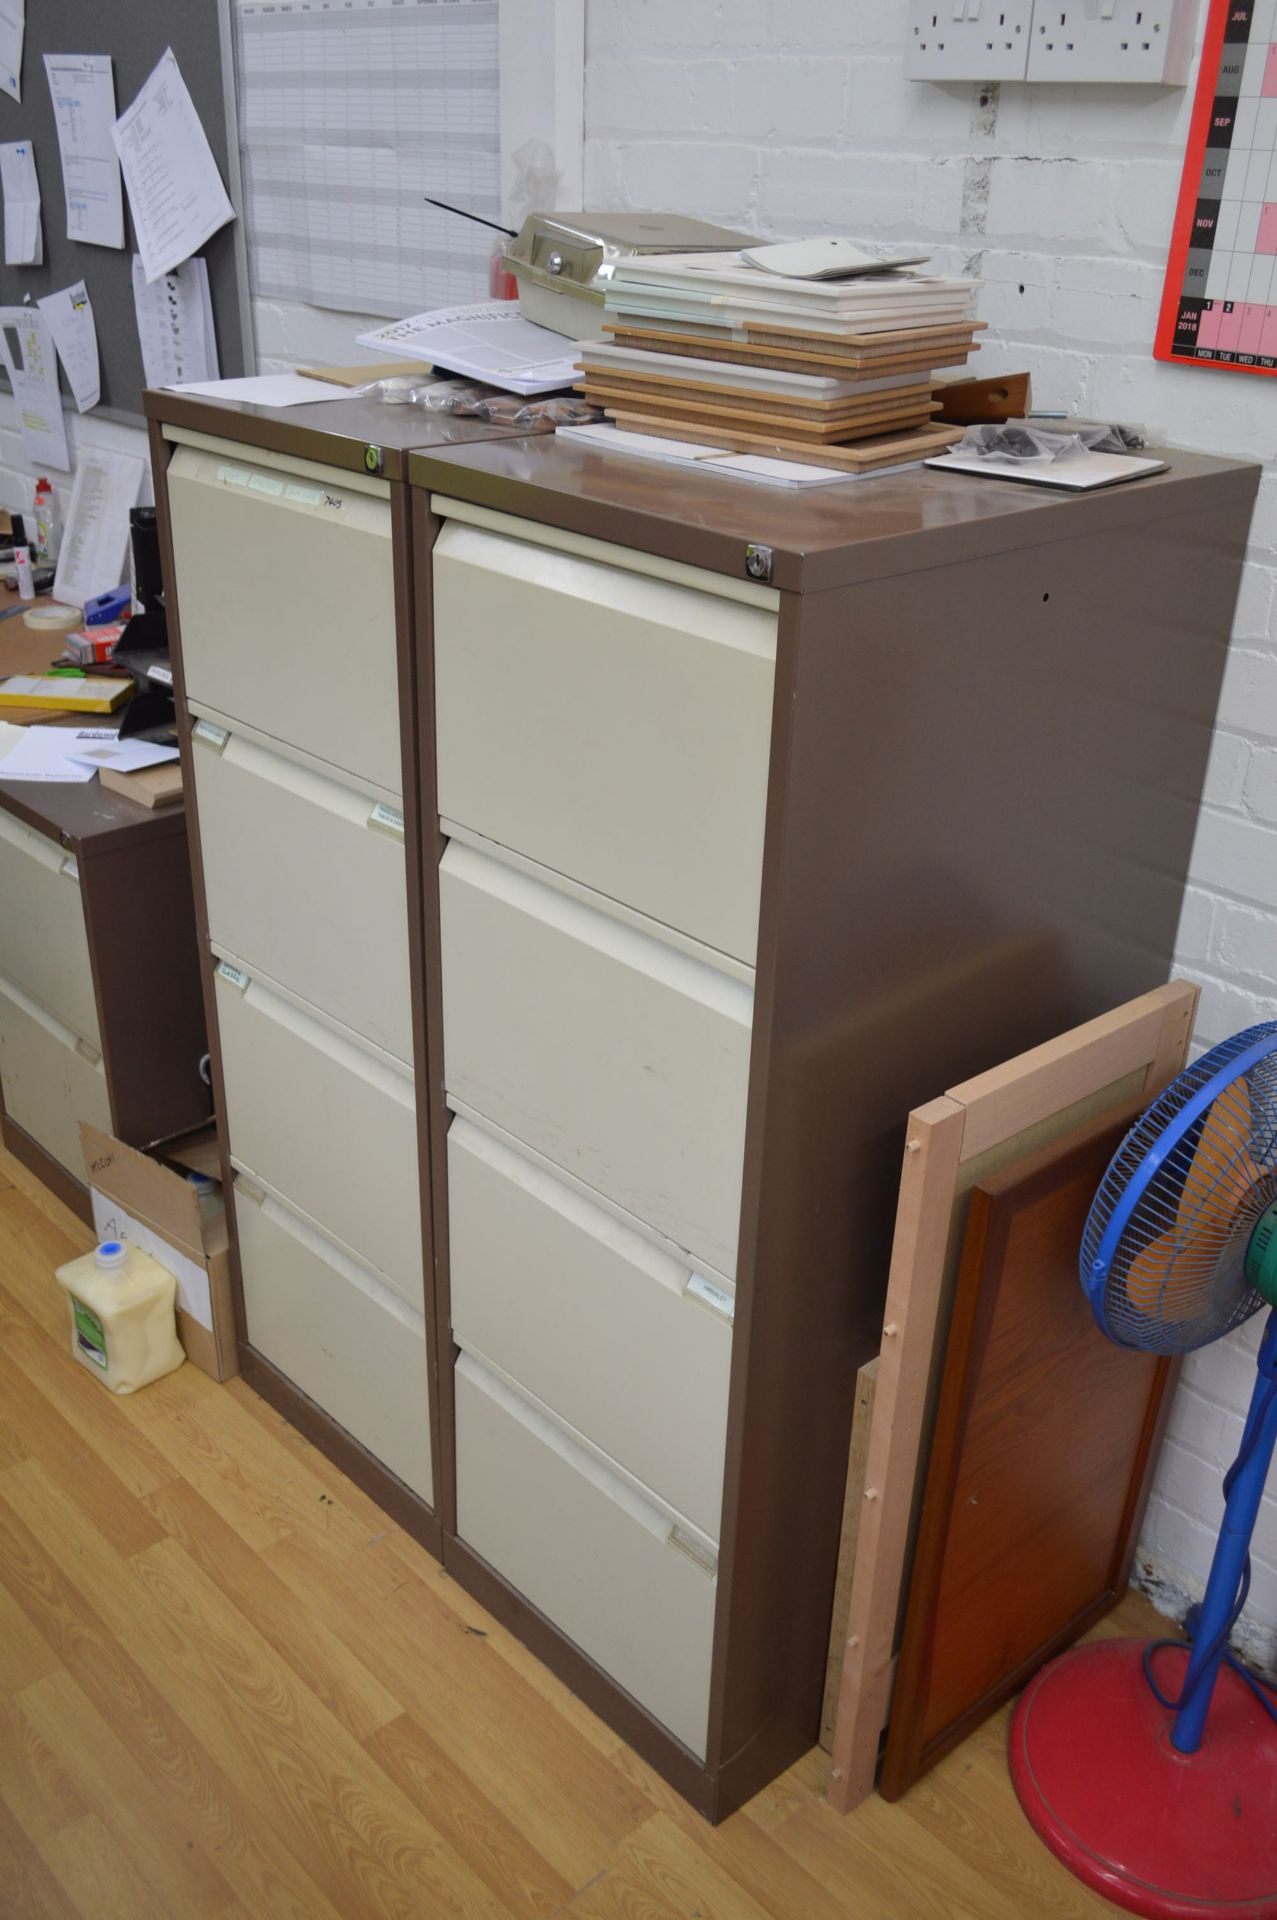 Loose Contents of Room, (excluding computers and printers) comprising three four drawer filing